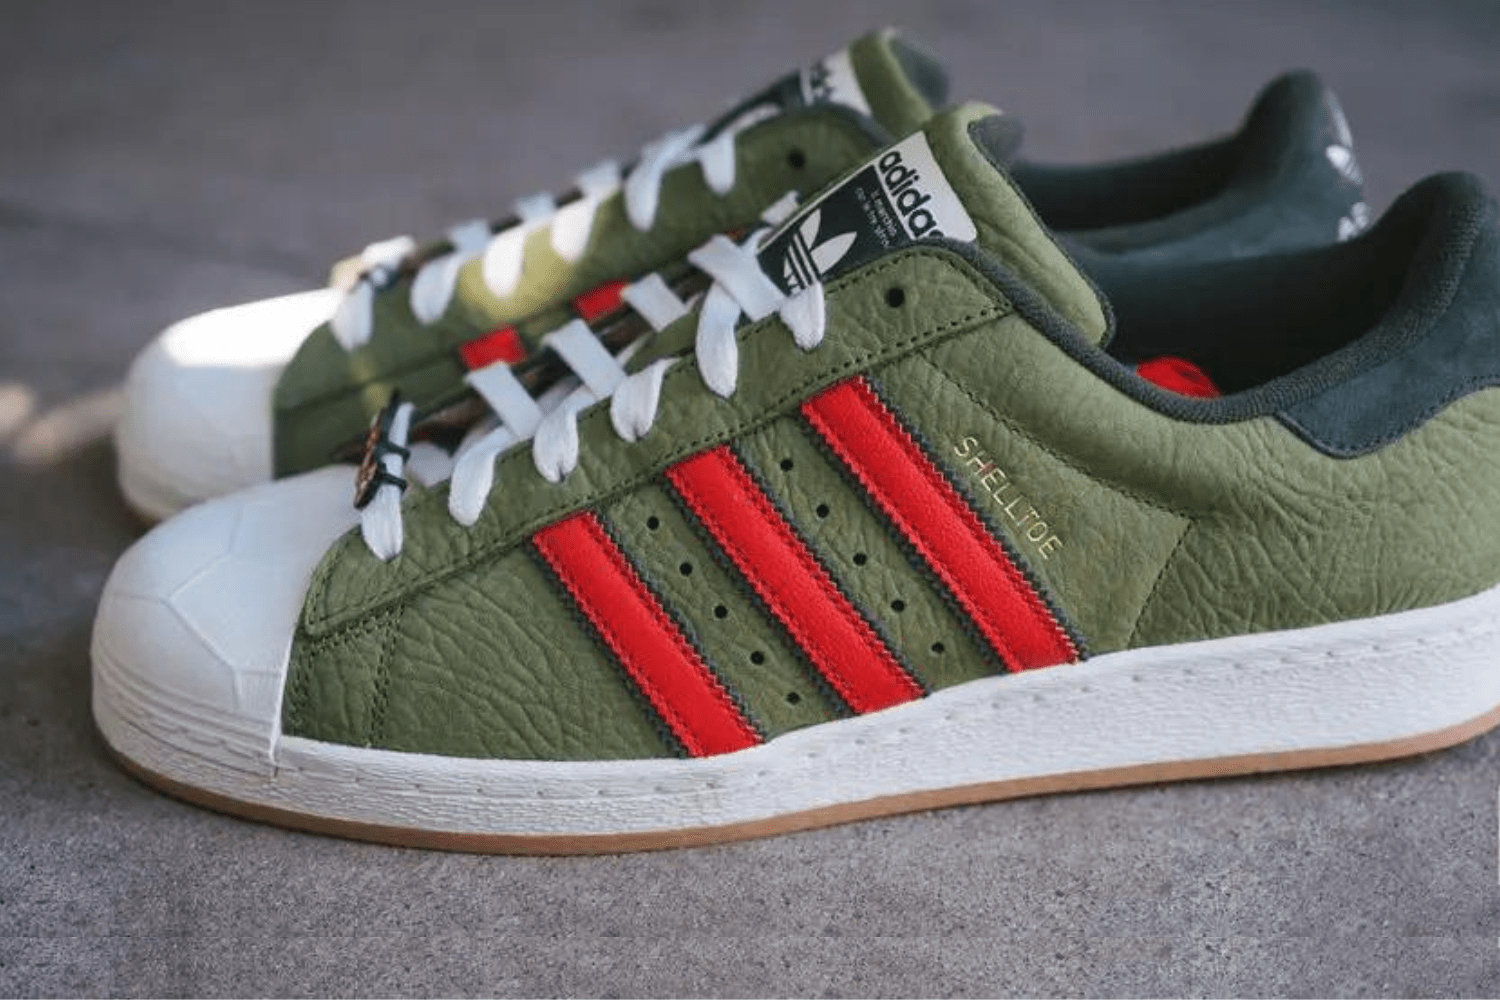 adidas pays tribute to Teenage Mutant Ninja Turtles 'Shelltoe' with Superstar collection